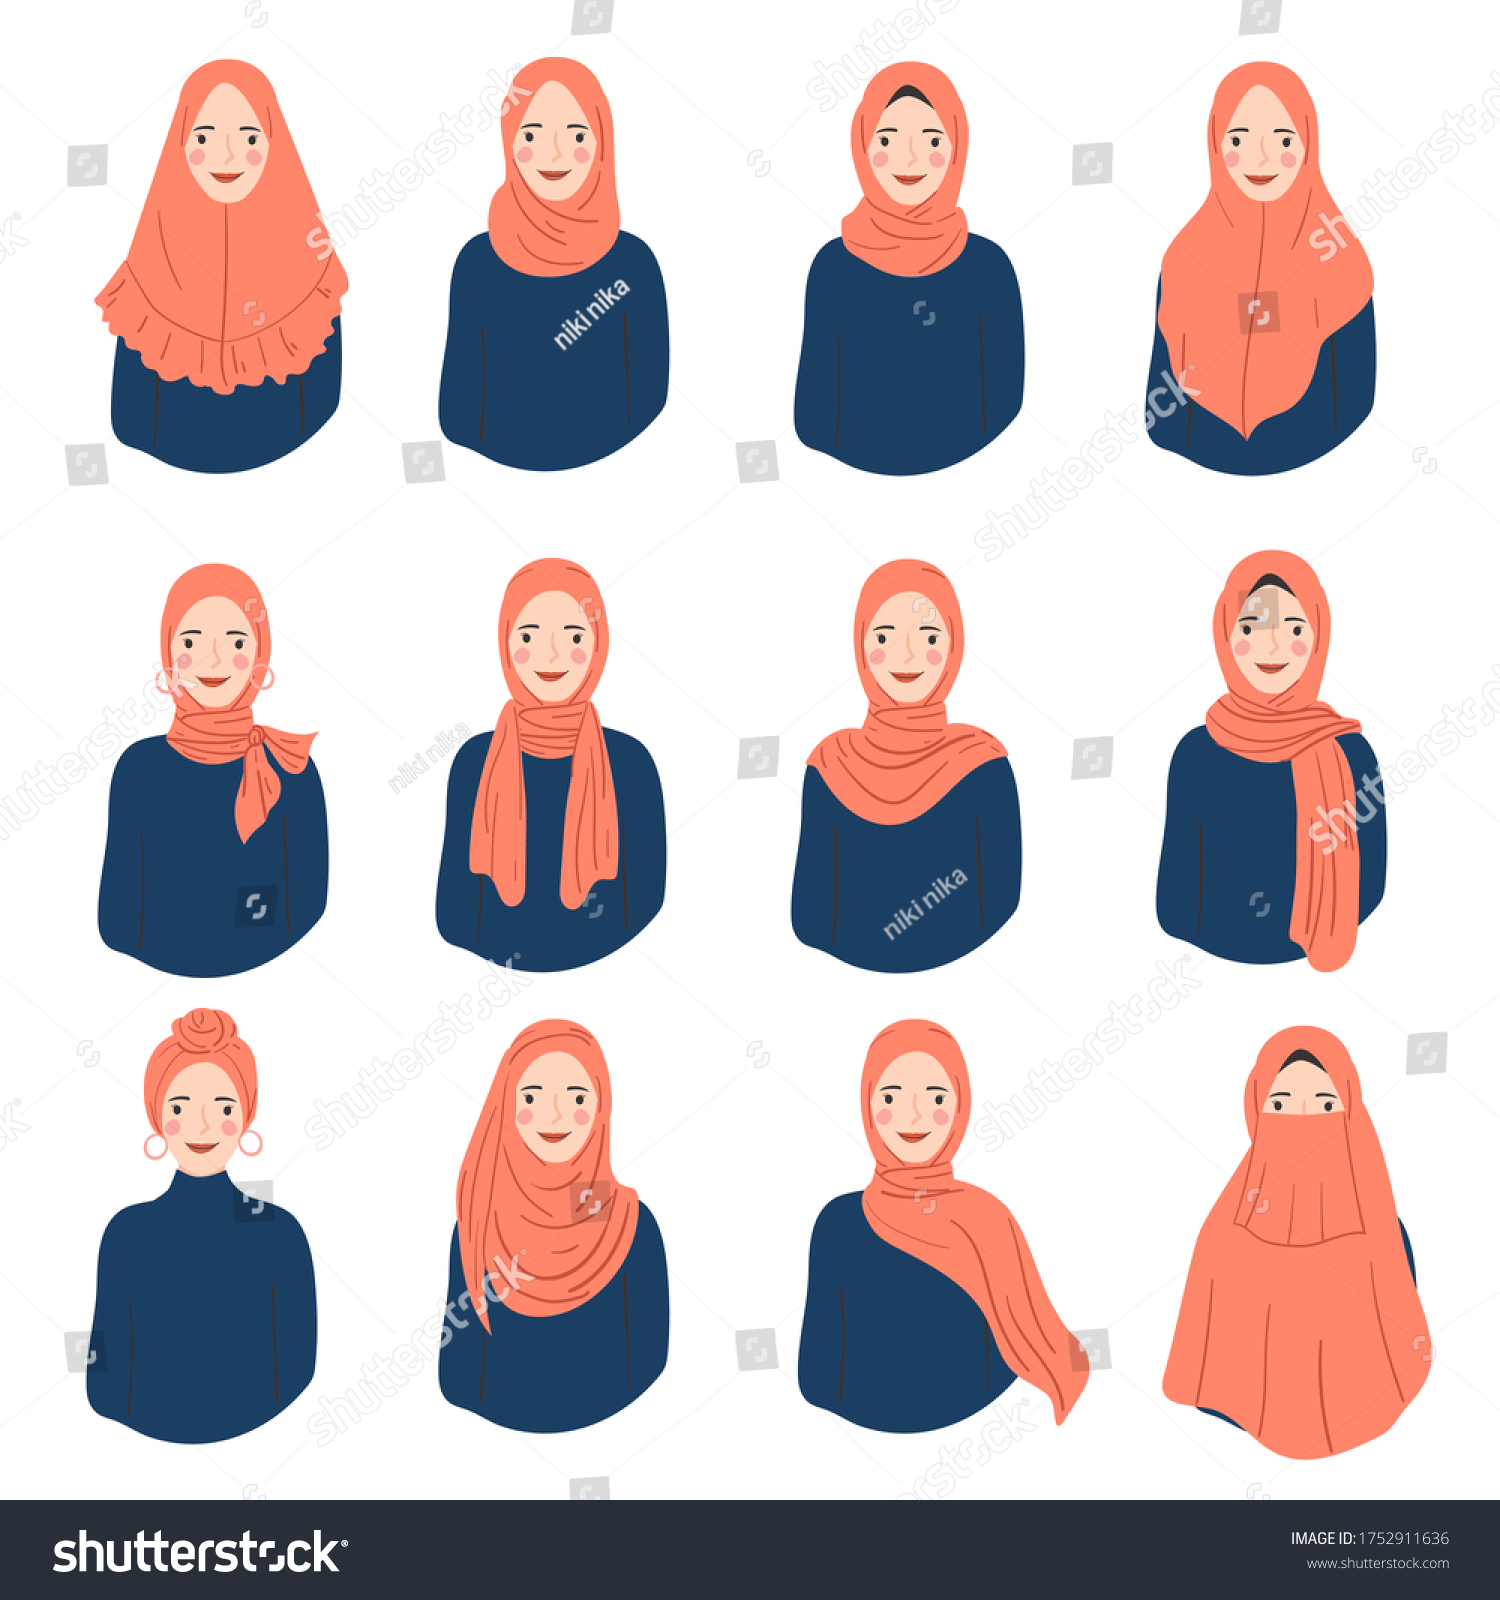 Hijab styling Images, Stock Photos ...